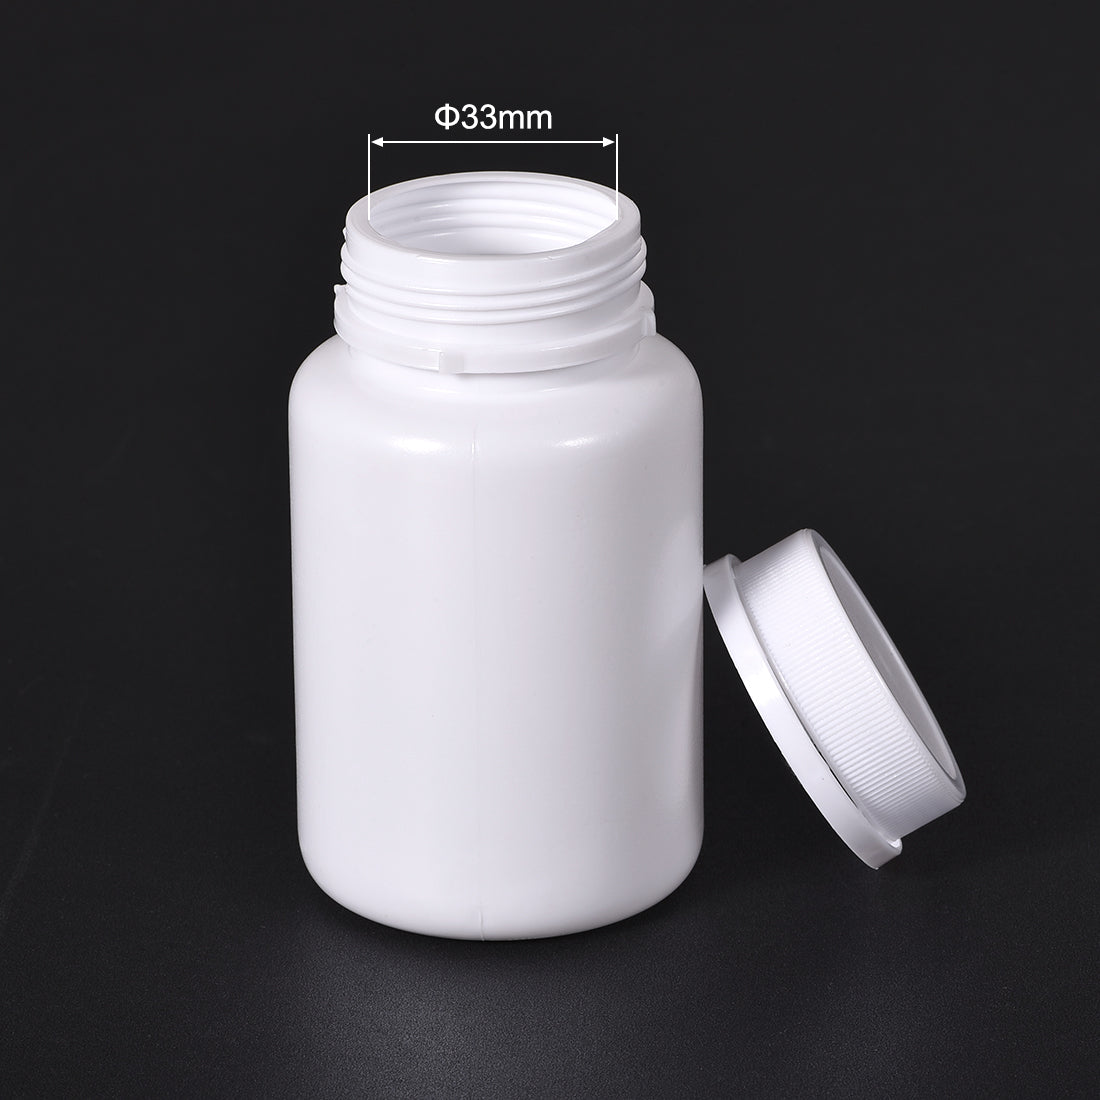 Uxcell Uxcell Plastic Lab Chemical Reagent Bottle, 150g Wide Mouth Sample Sealing Solid Storage Container 10pcs